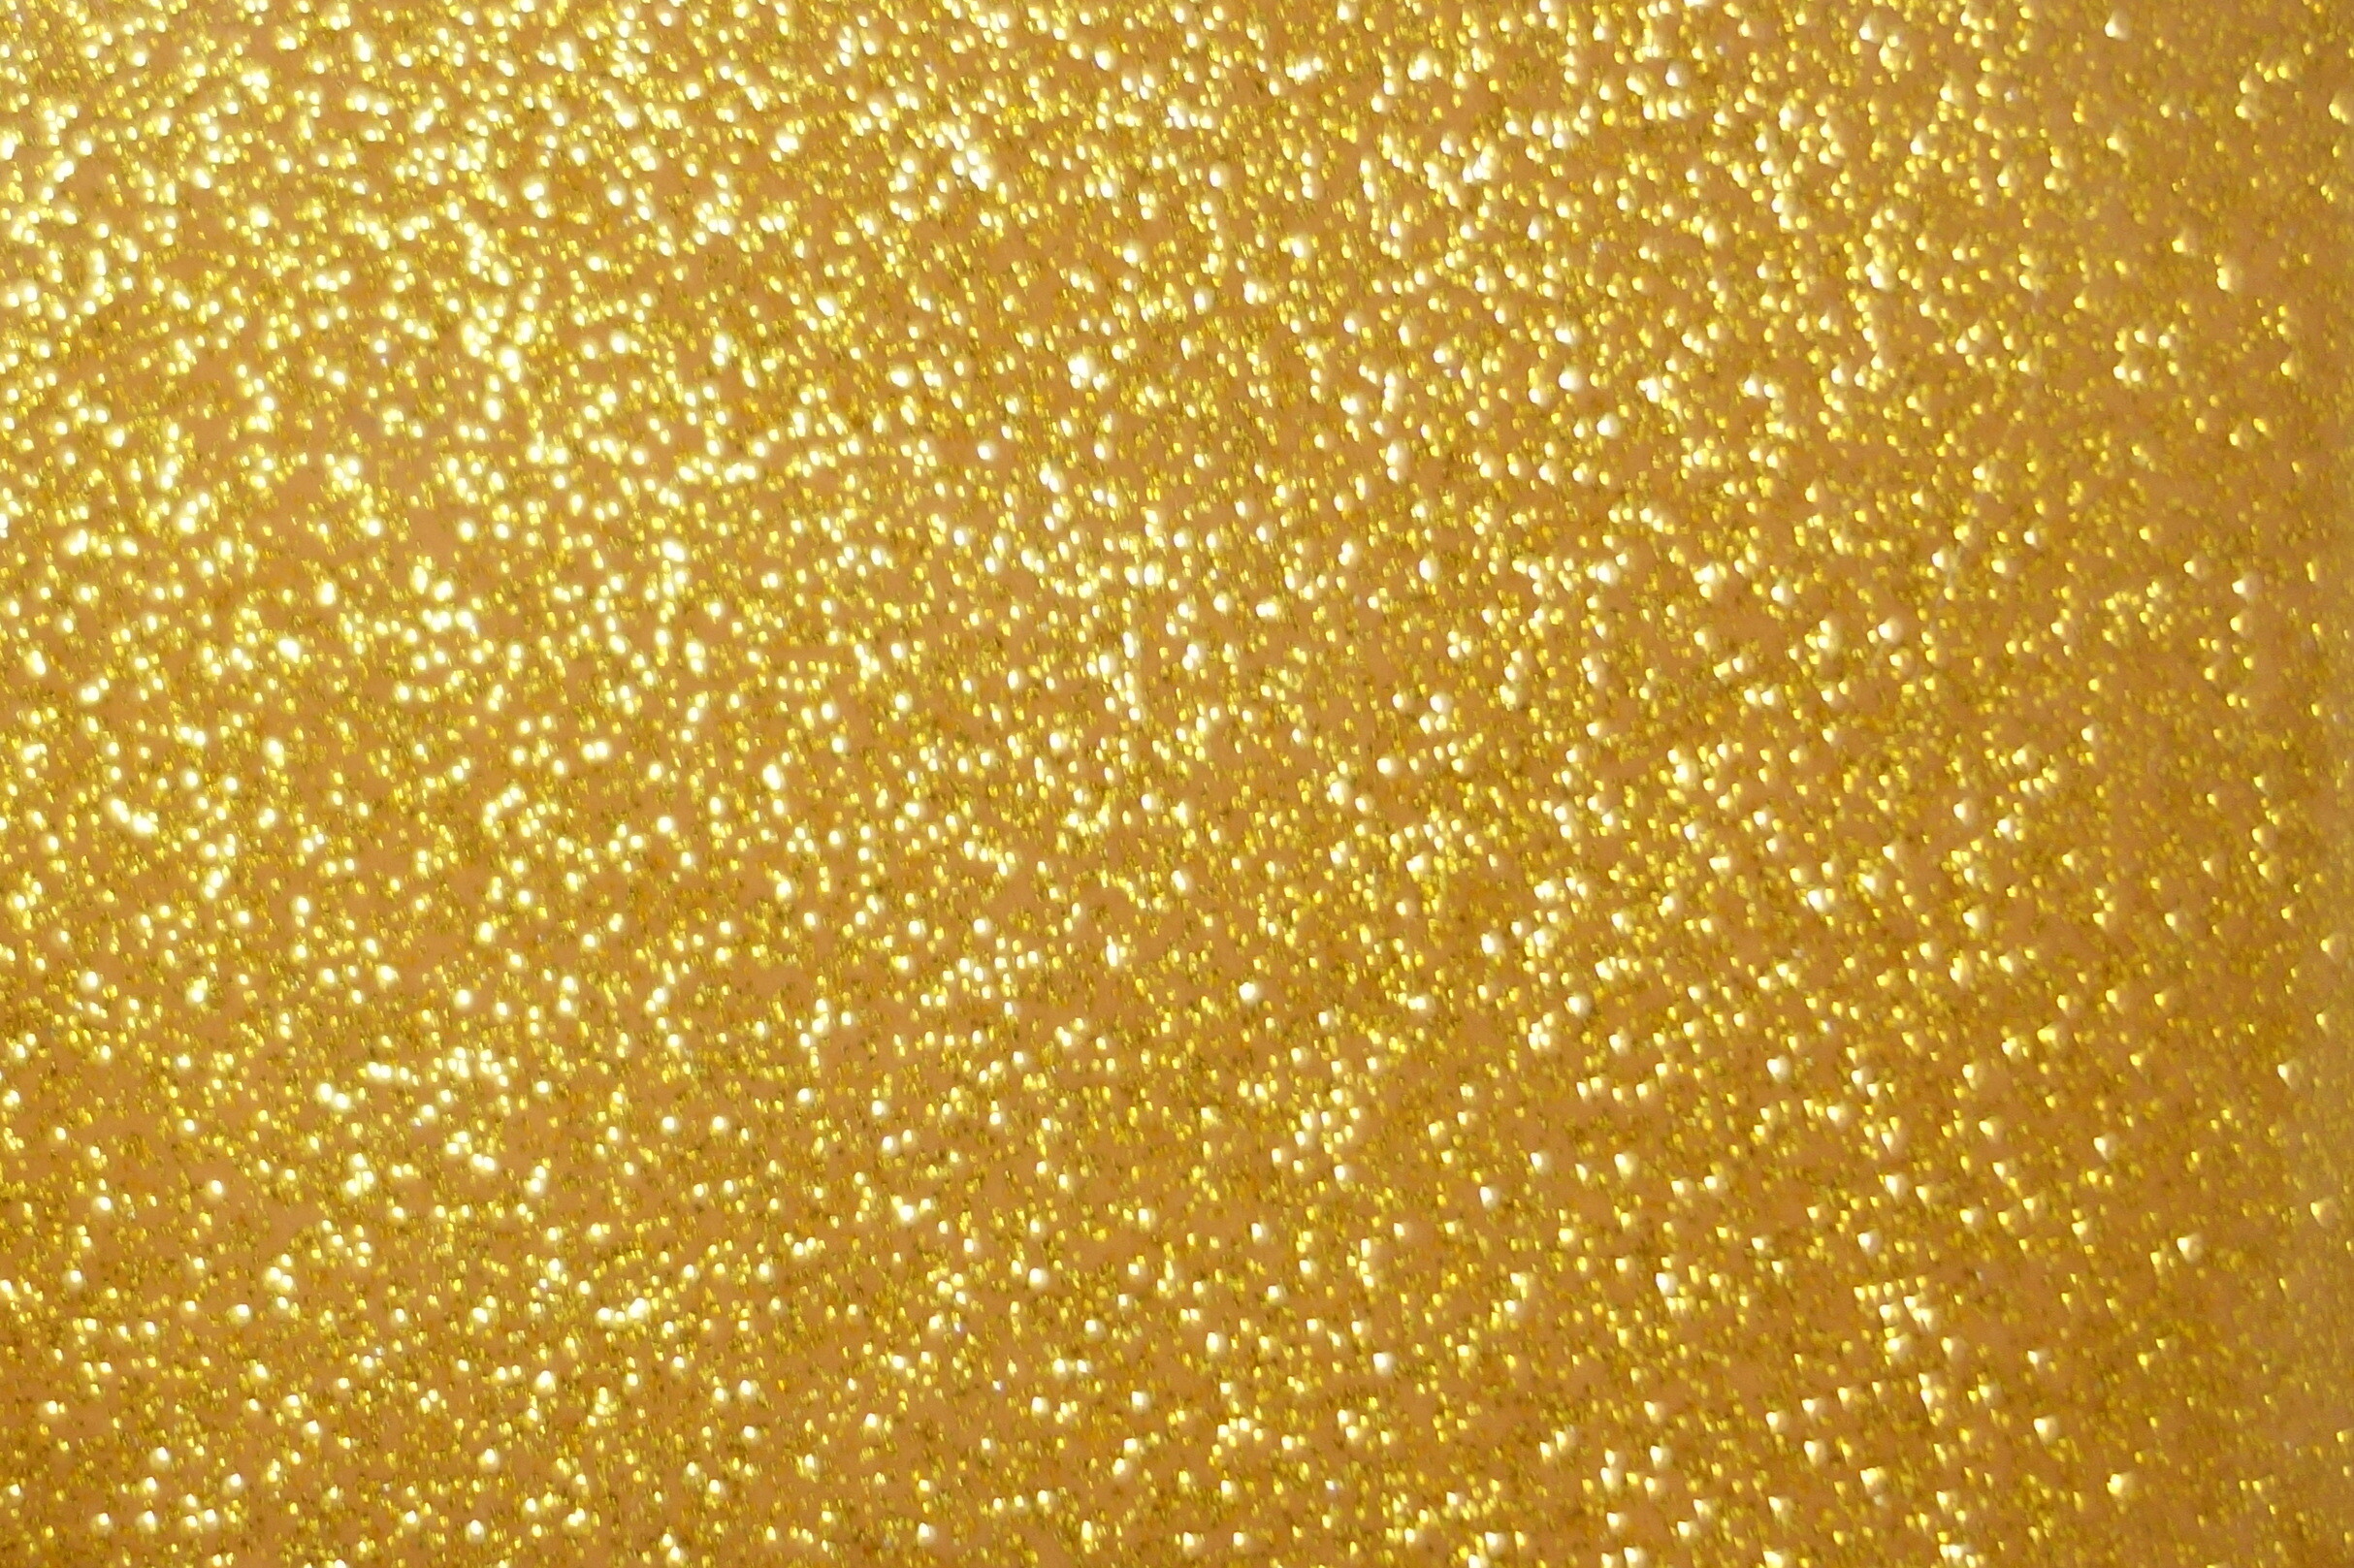 Gold Glitter: Fire-gilding, A process by which an amalgam of gold is applied to metallic surfaces. 2430x1620 HD Wallpaper.